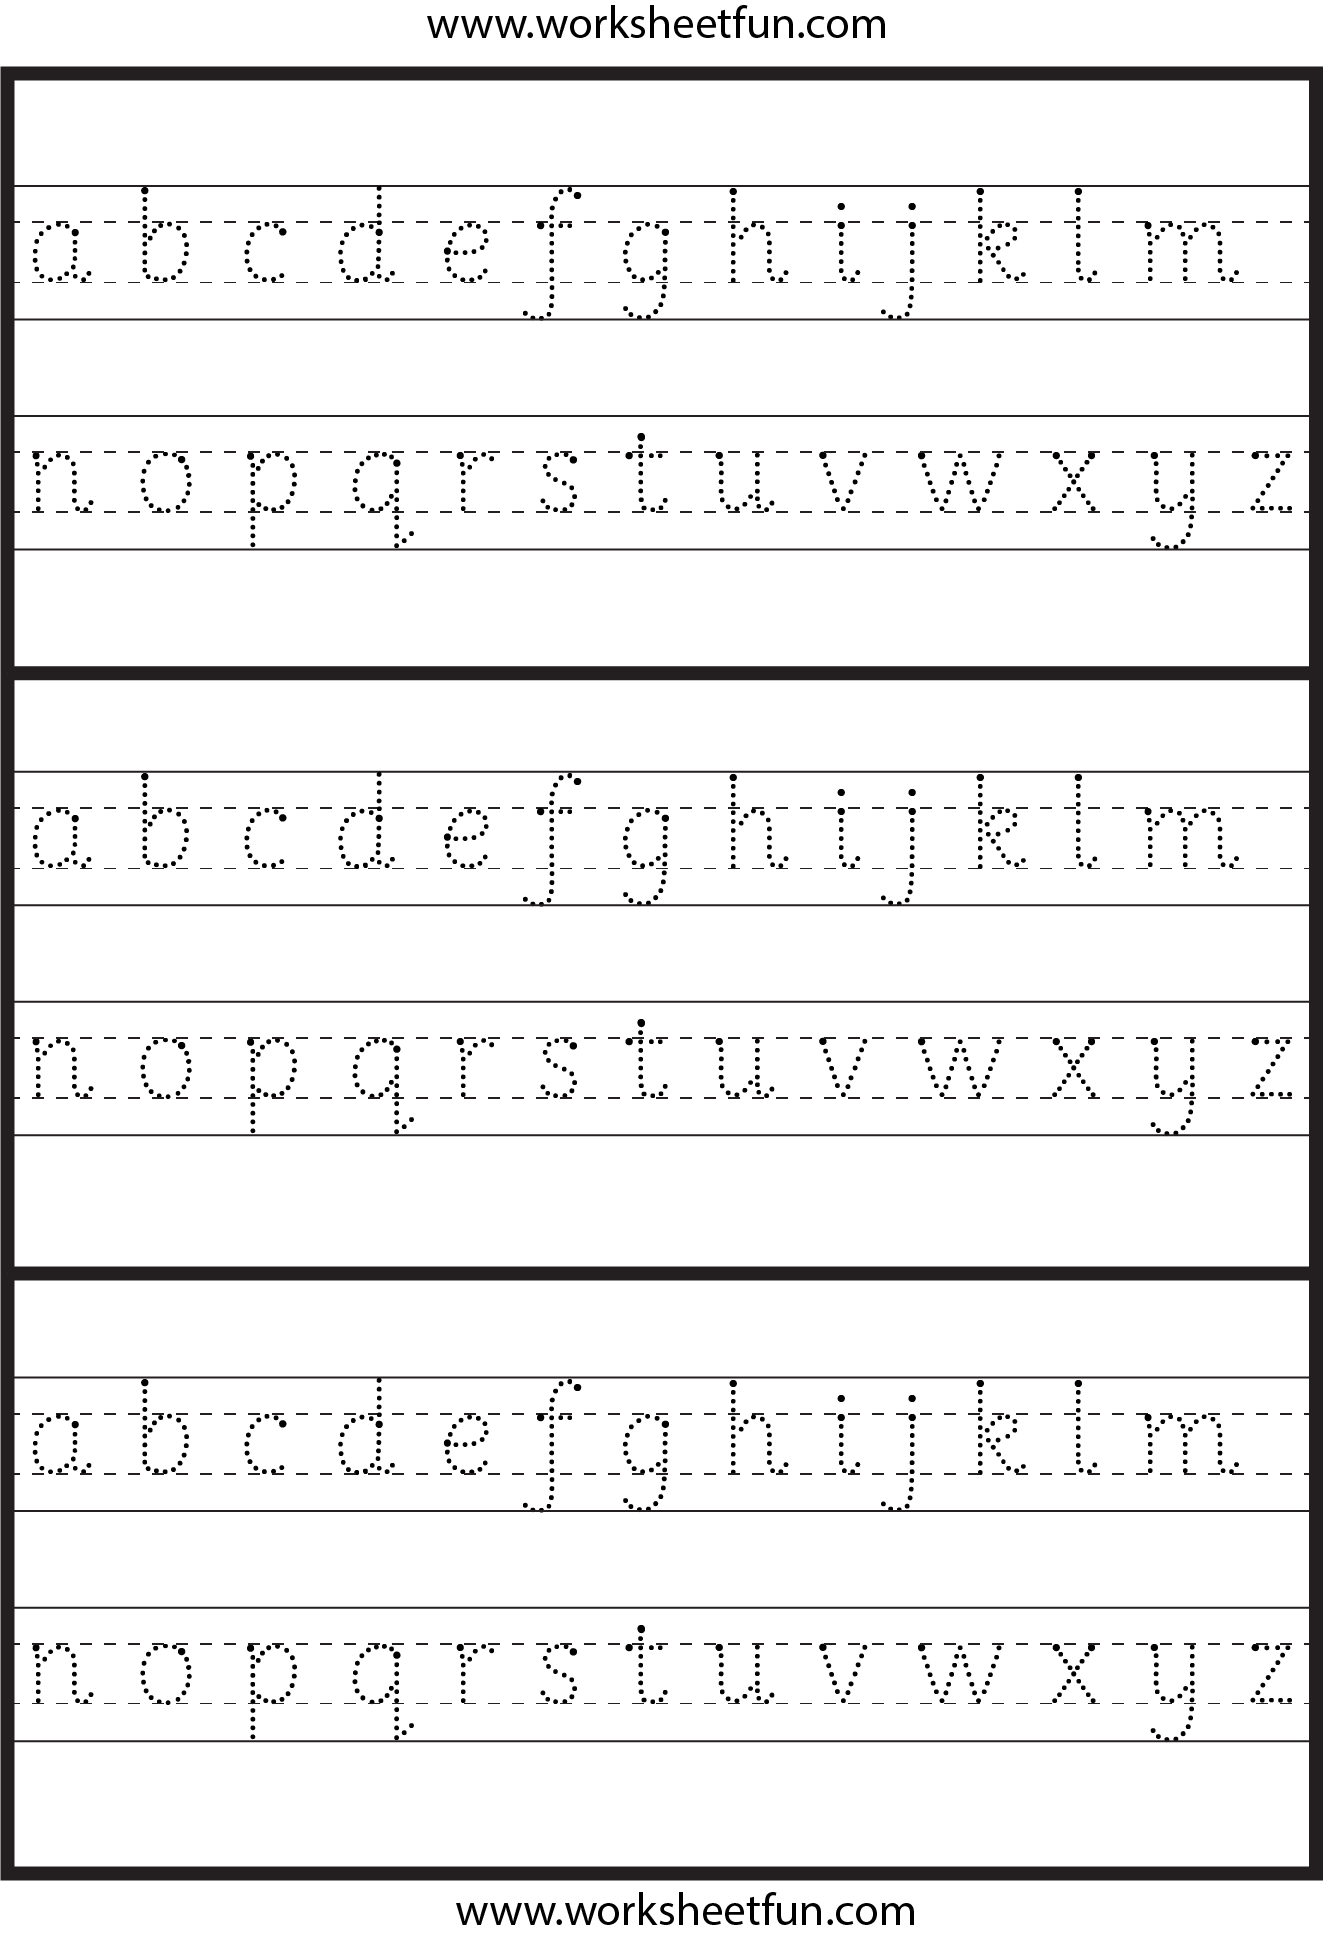 Lowercase Letter Tracing – 1 Worksheet / Free Printable with regard to Alphabet Handwriting Worksheets Free Printables